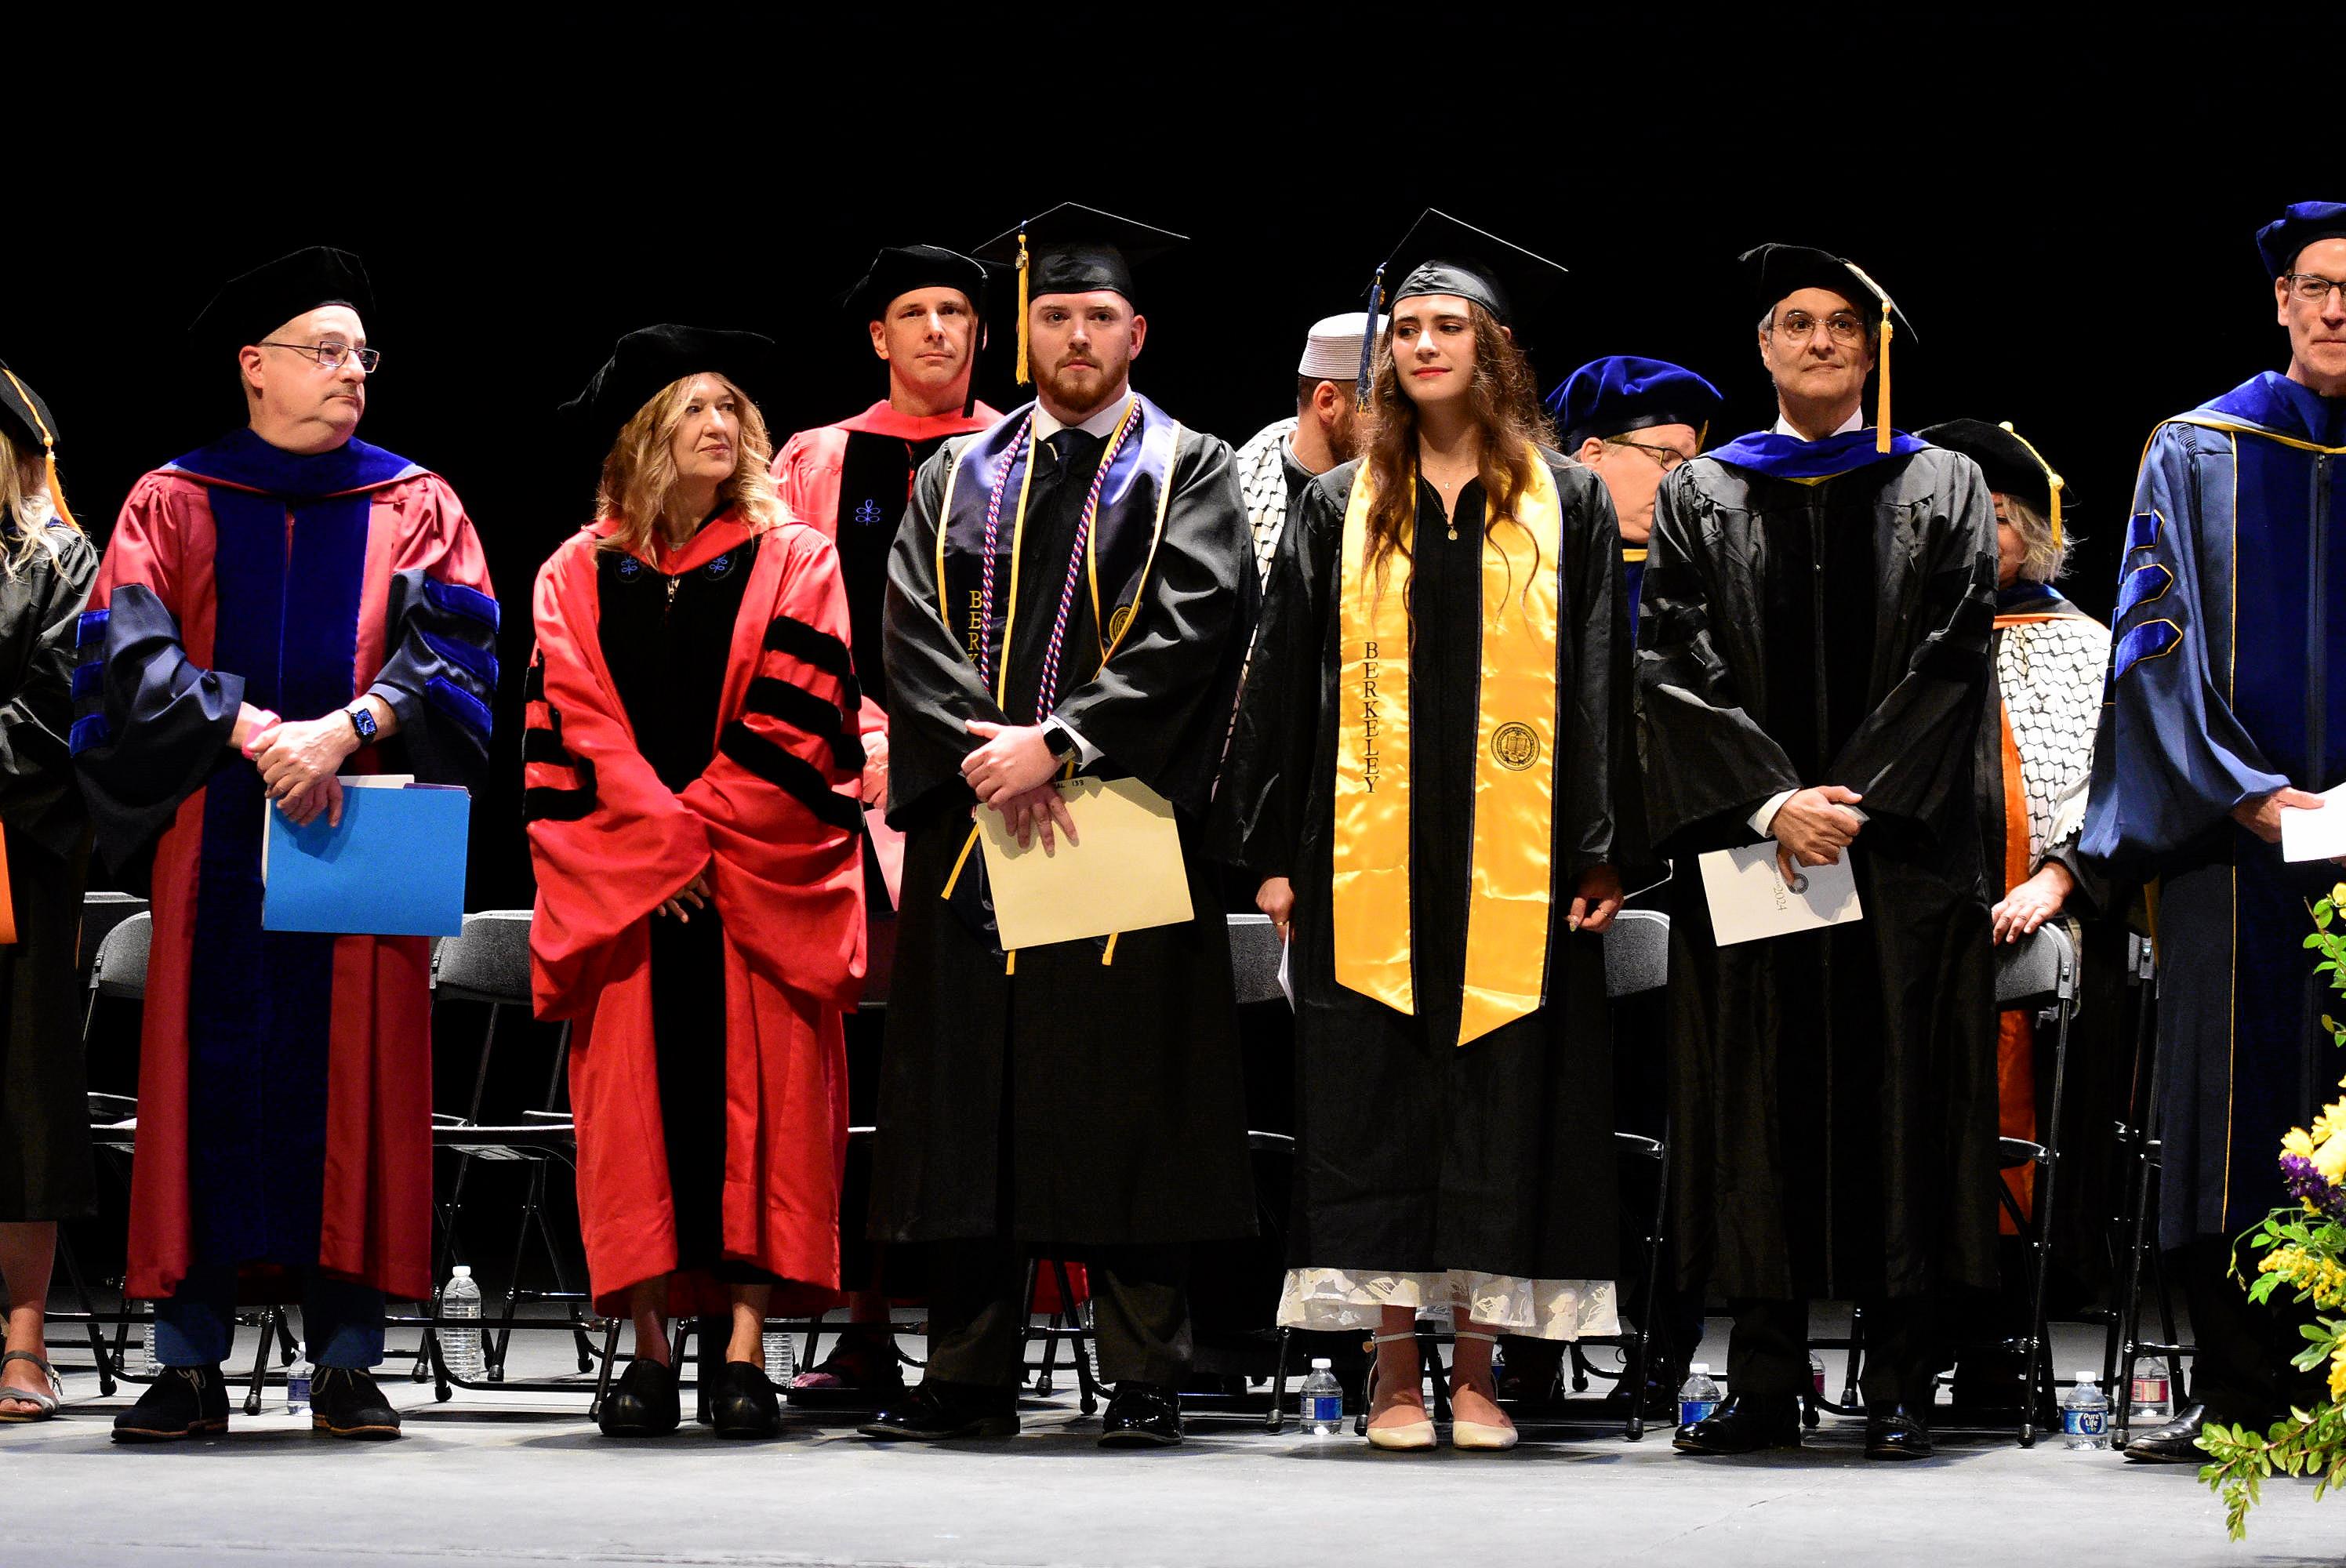 Graduates and faculty stand together at commencement